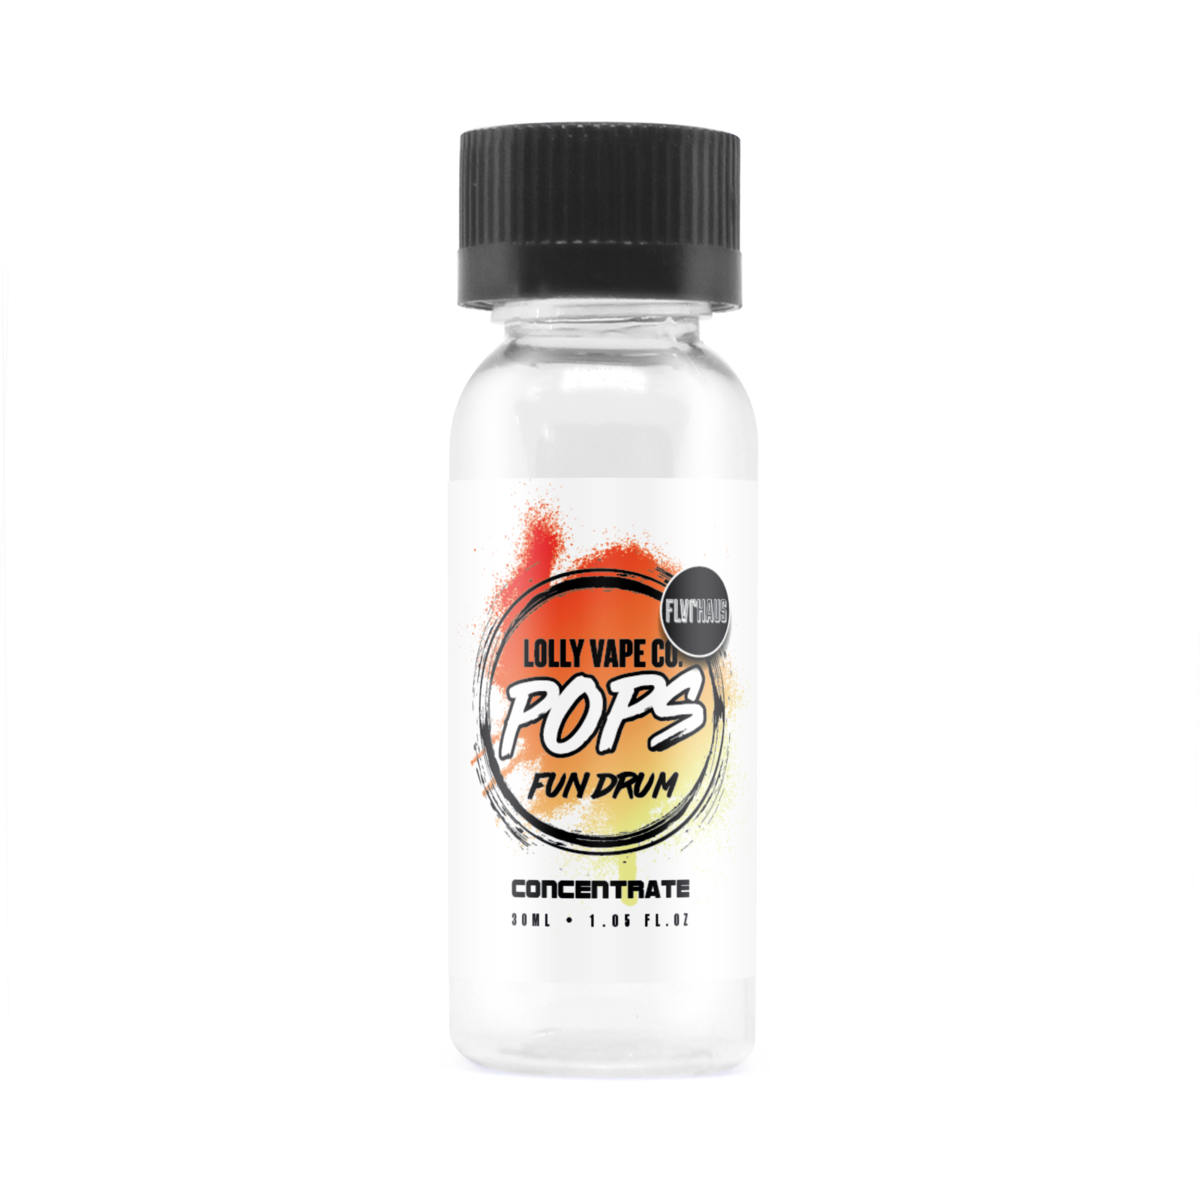 Fundrum Ice Concentrate E-liquid by Lolly Vape Co 30ml